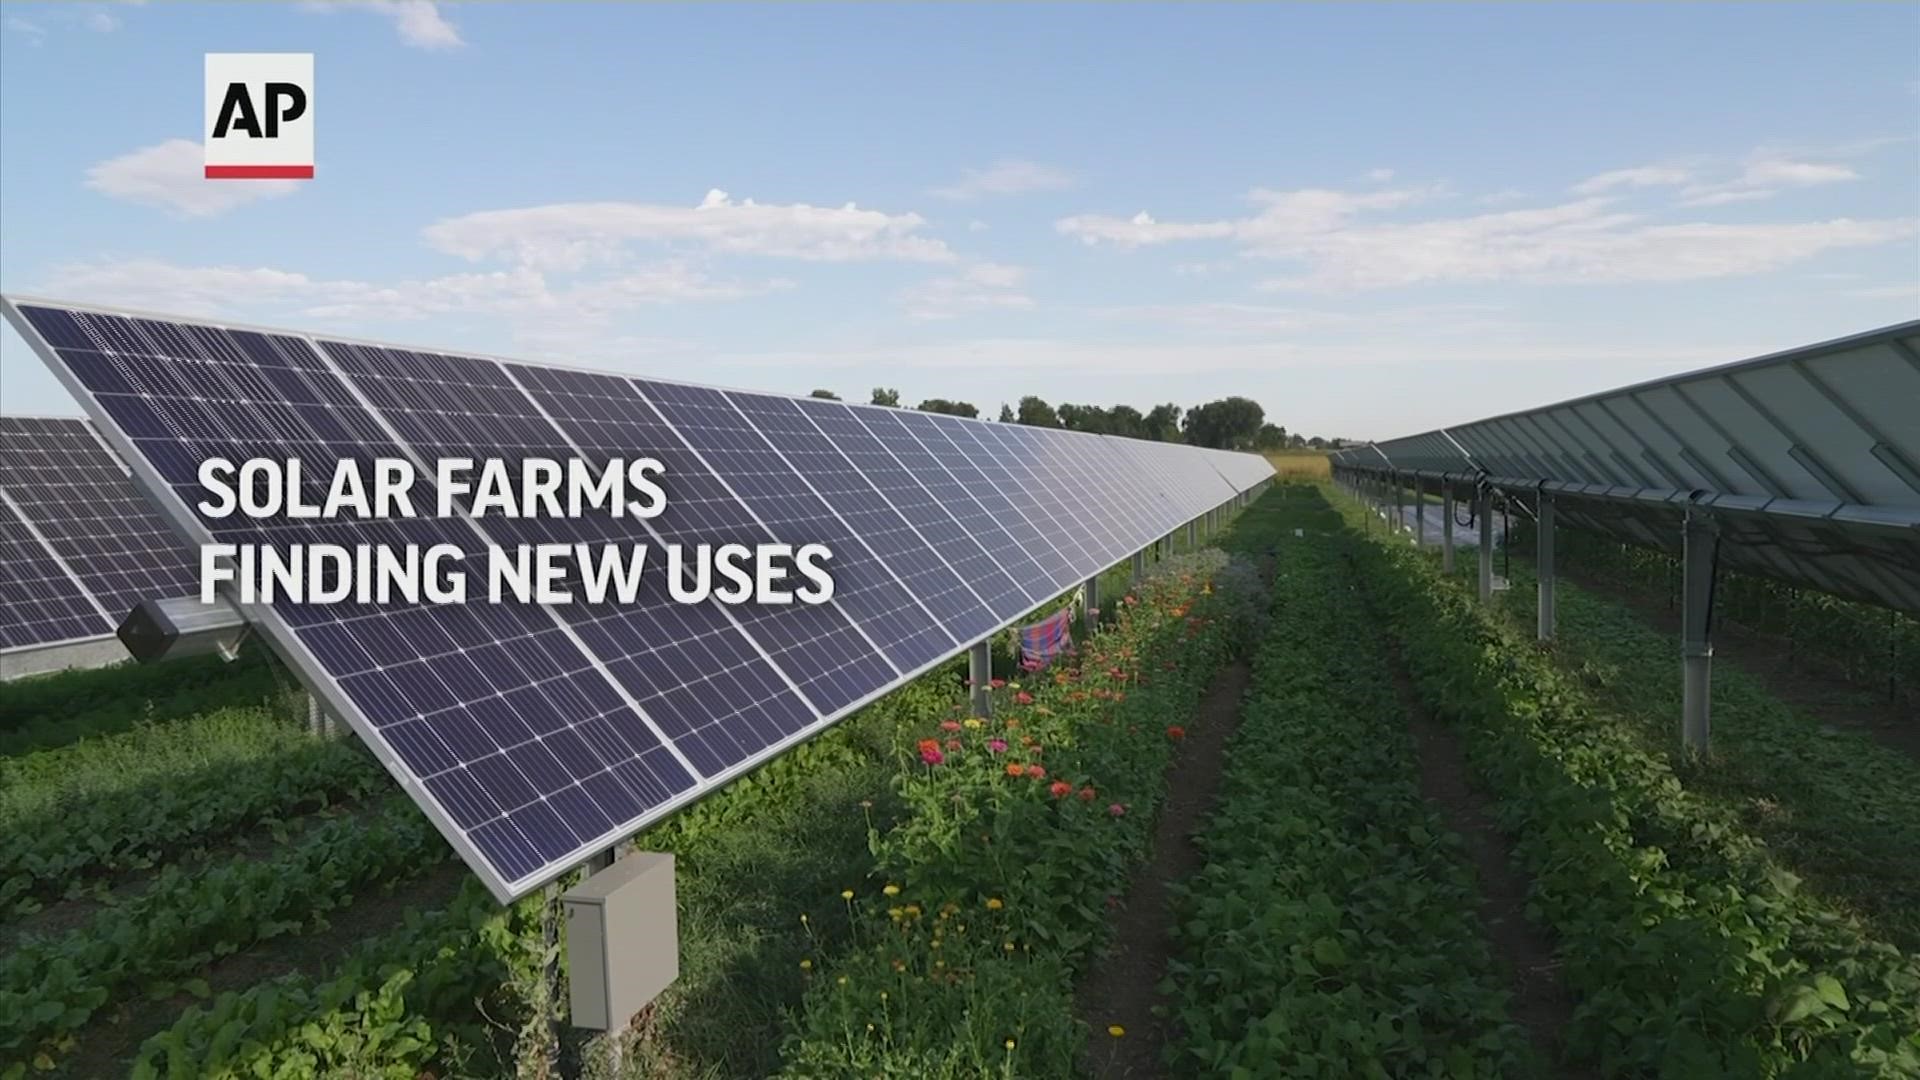 While some worry about the loss of valuable farmland with the proliferation of solar panels, others see an opportunity.